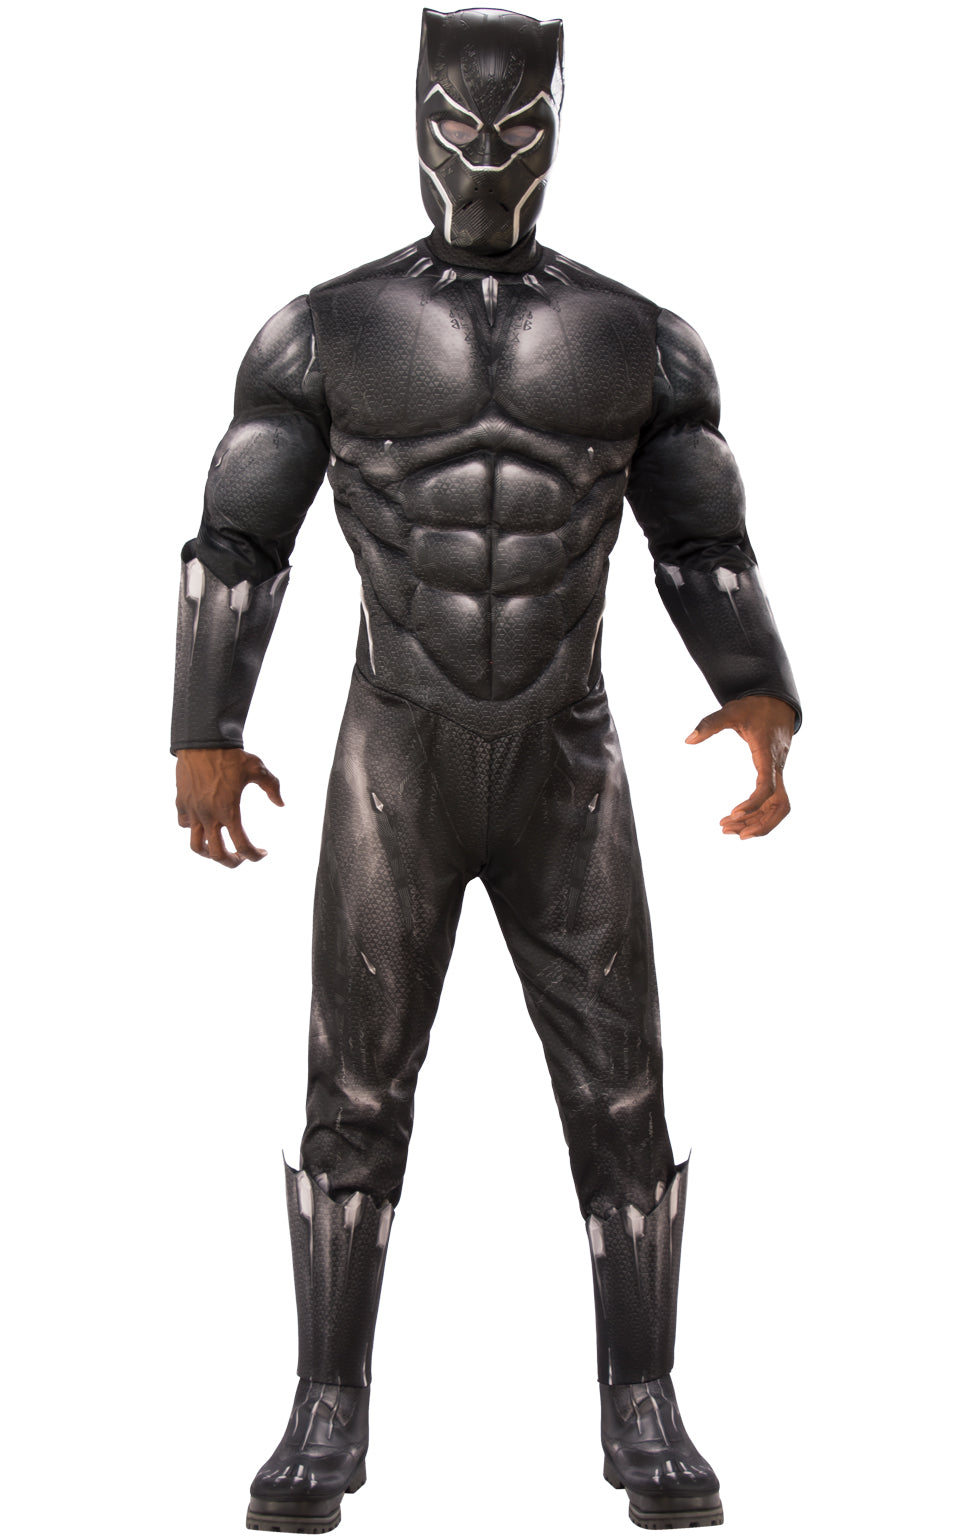 Adult Deluxe Black Panther Muscle Costume for men.